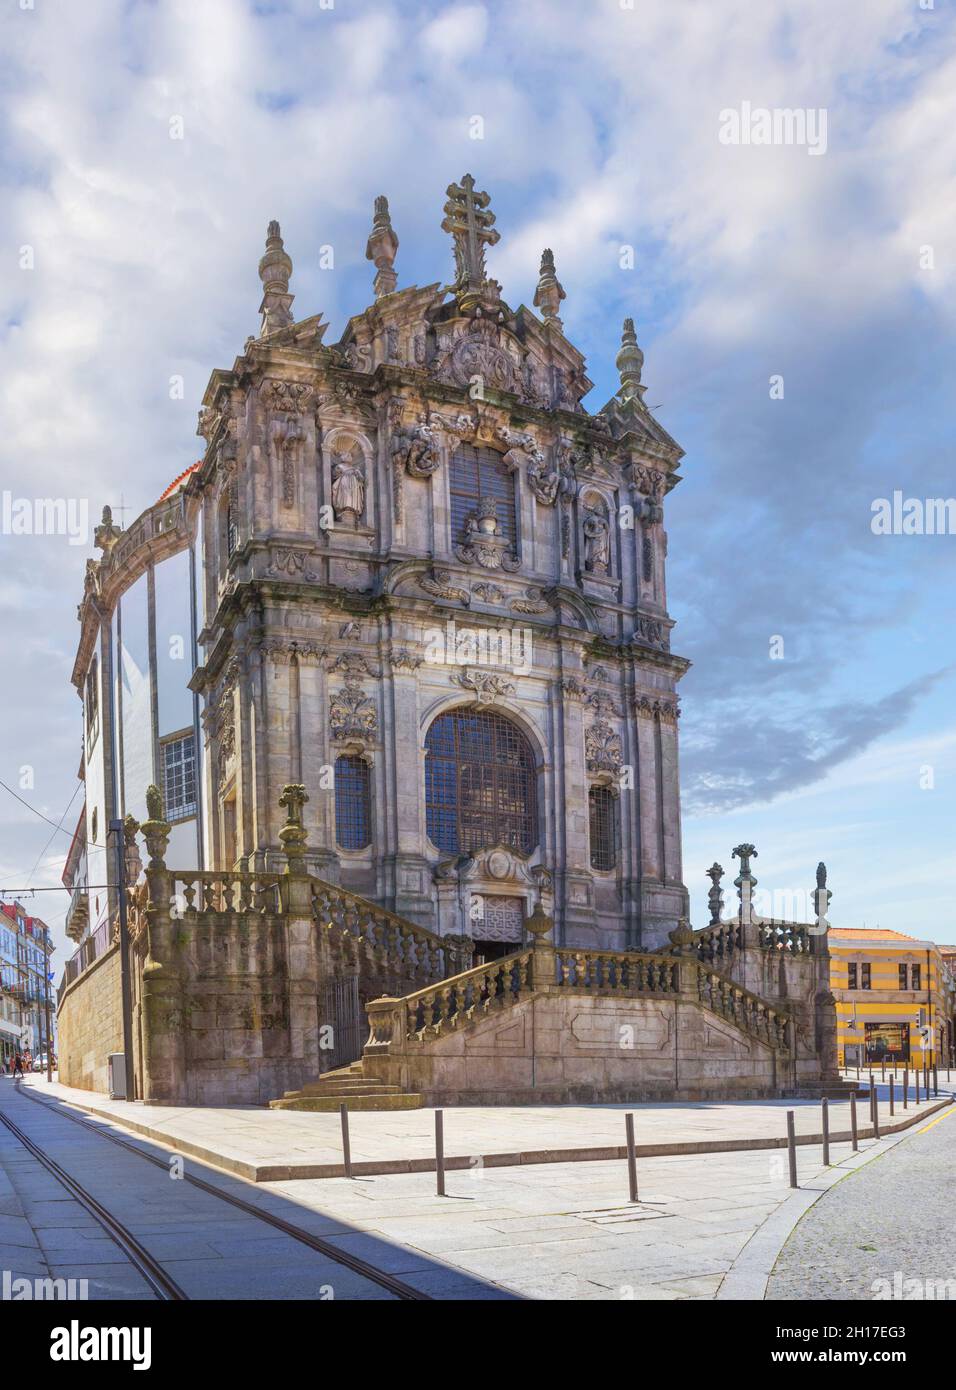 Clerigos church began to build in 1732, and its construction took 18 years. The building of the church is an unsurpassed example of Baroque architectu Stock Photo